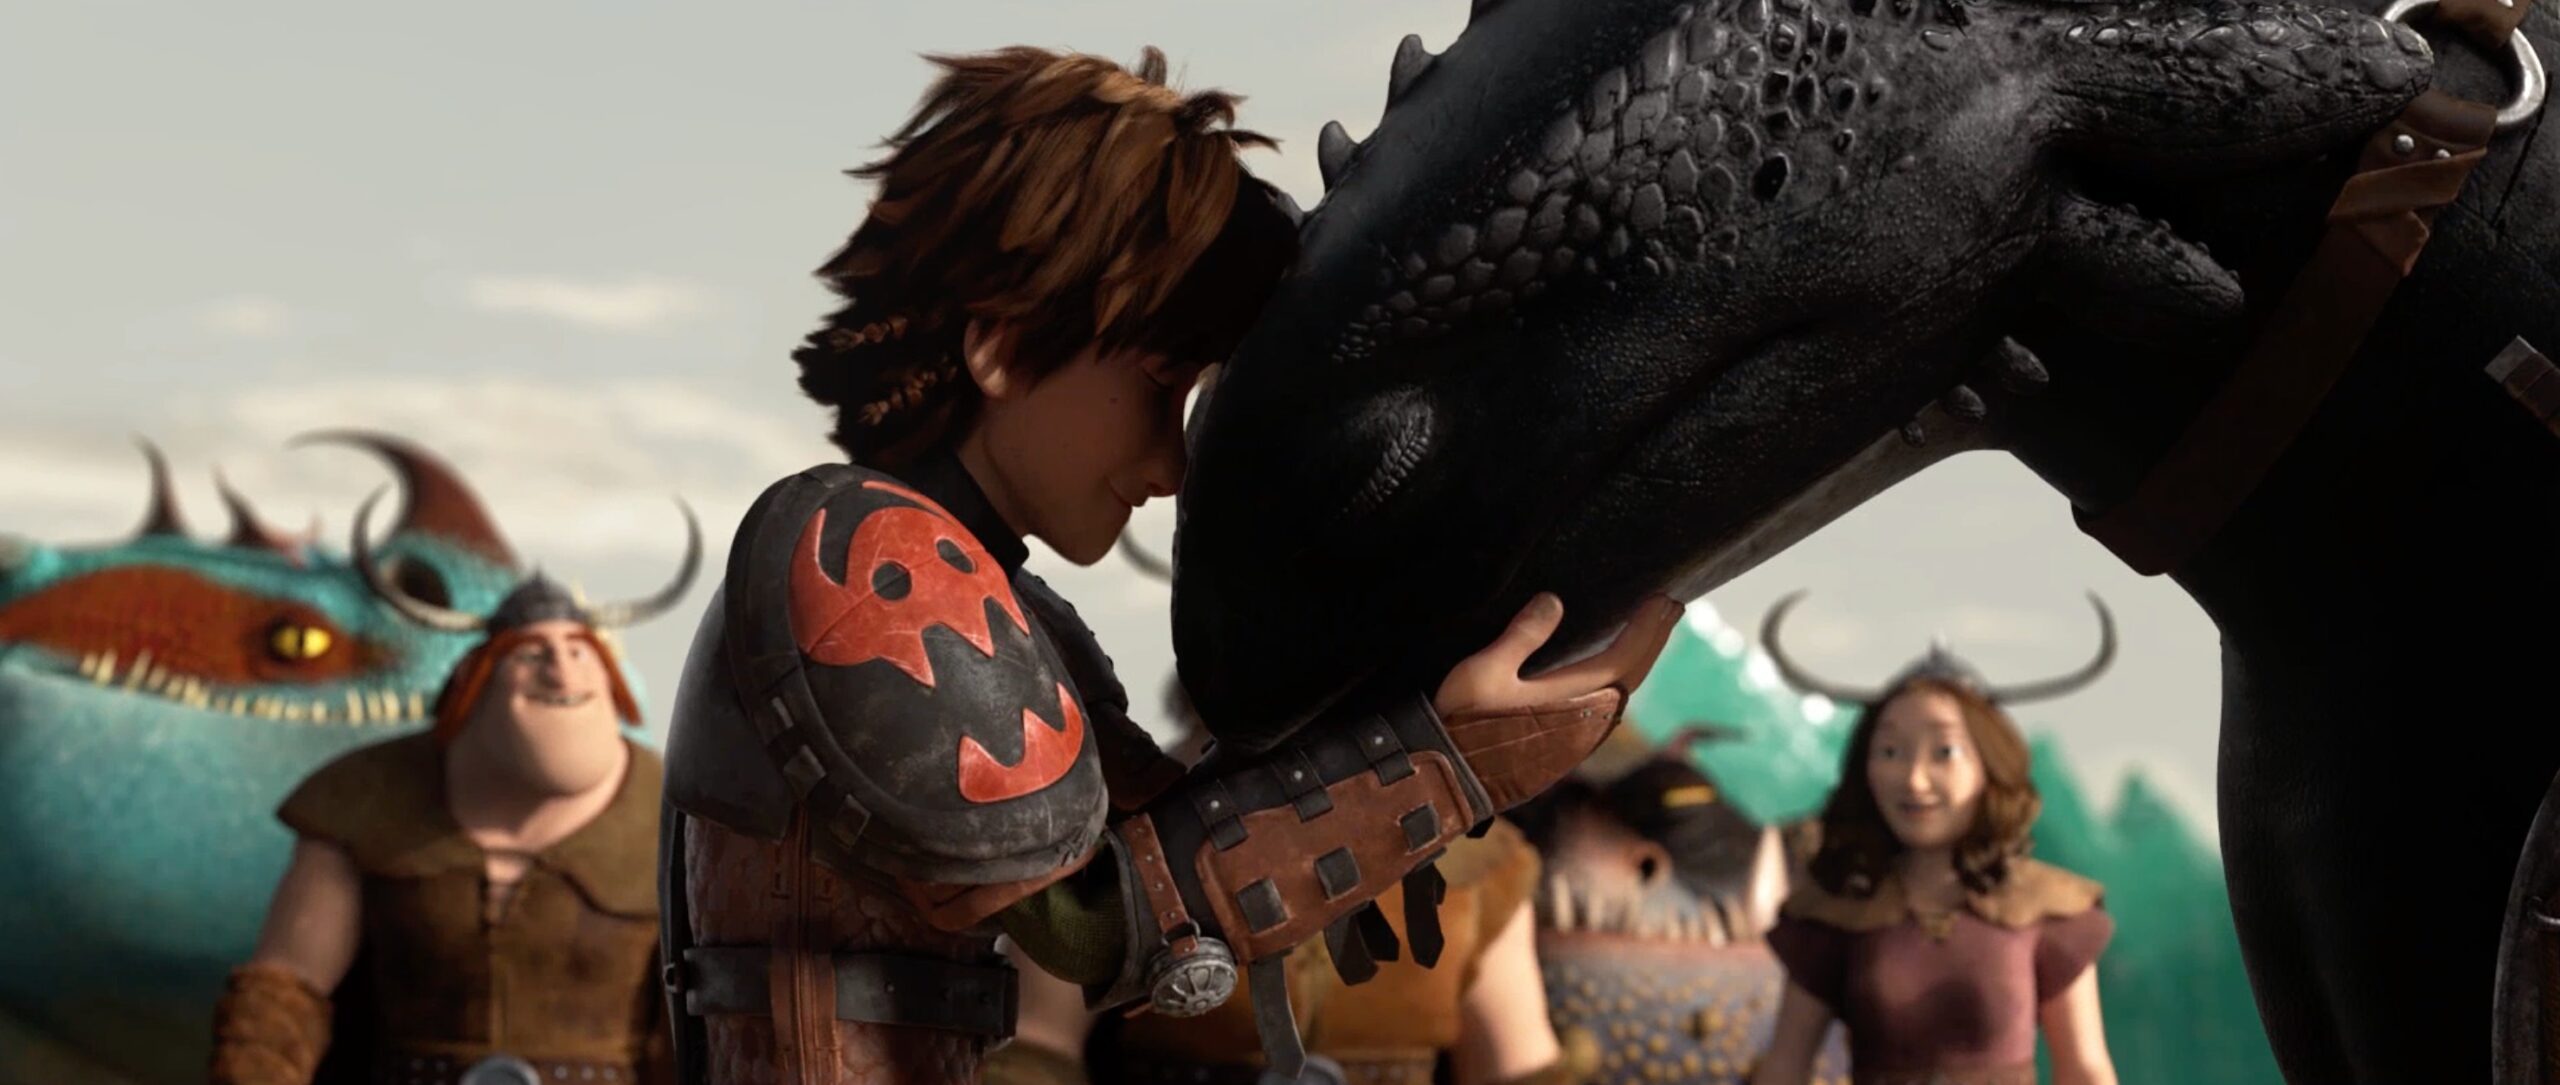 ‘How to Train Your Dragon’ live-action film in the works  thumbnail